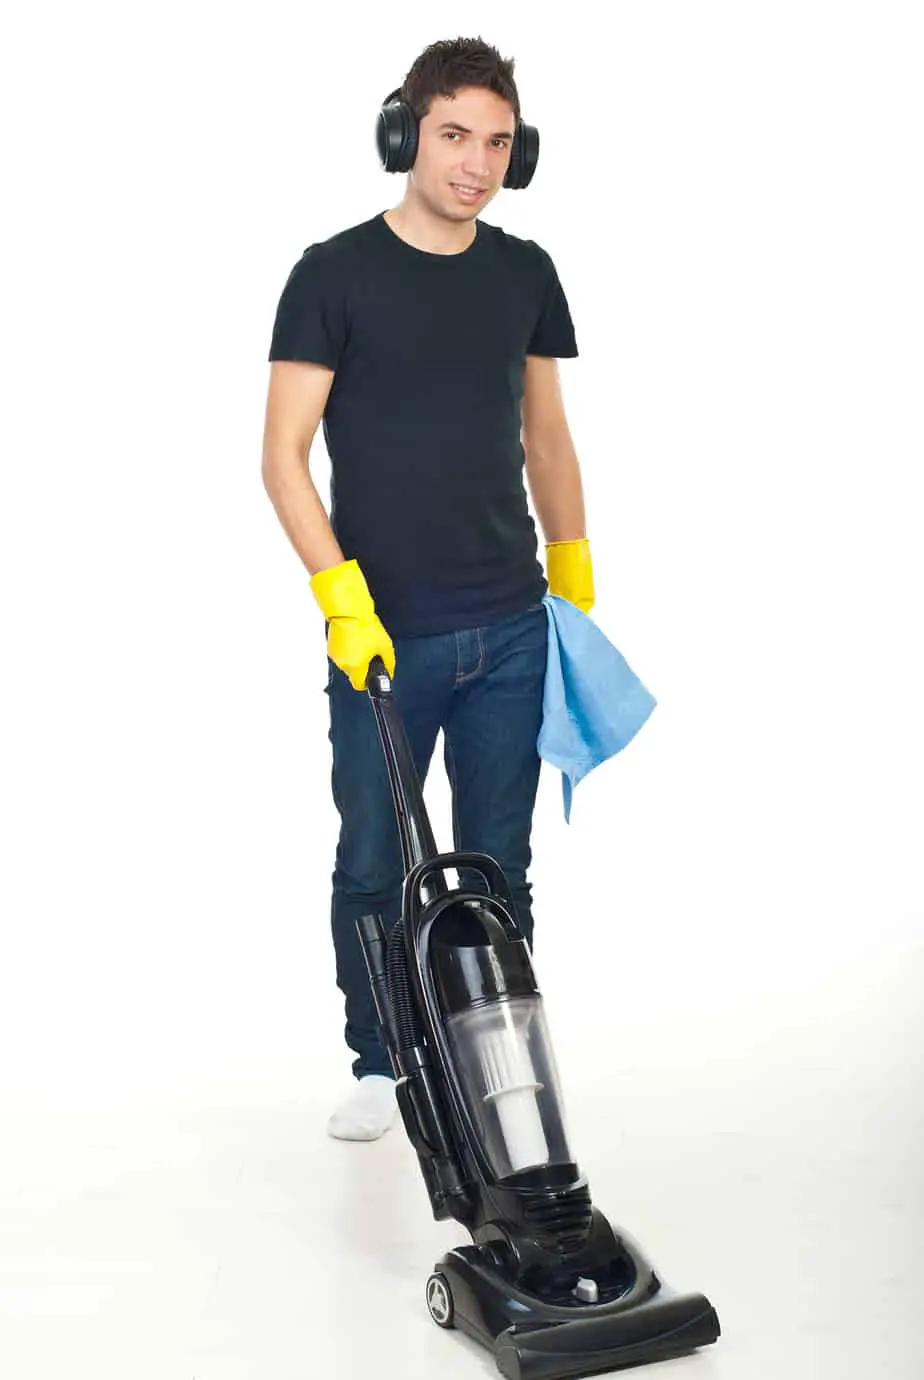 Read more about the article The Three Best Battery Powered Vacuums